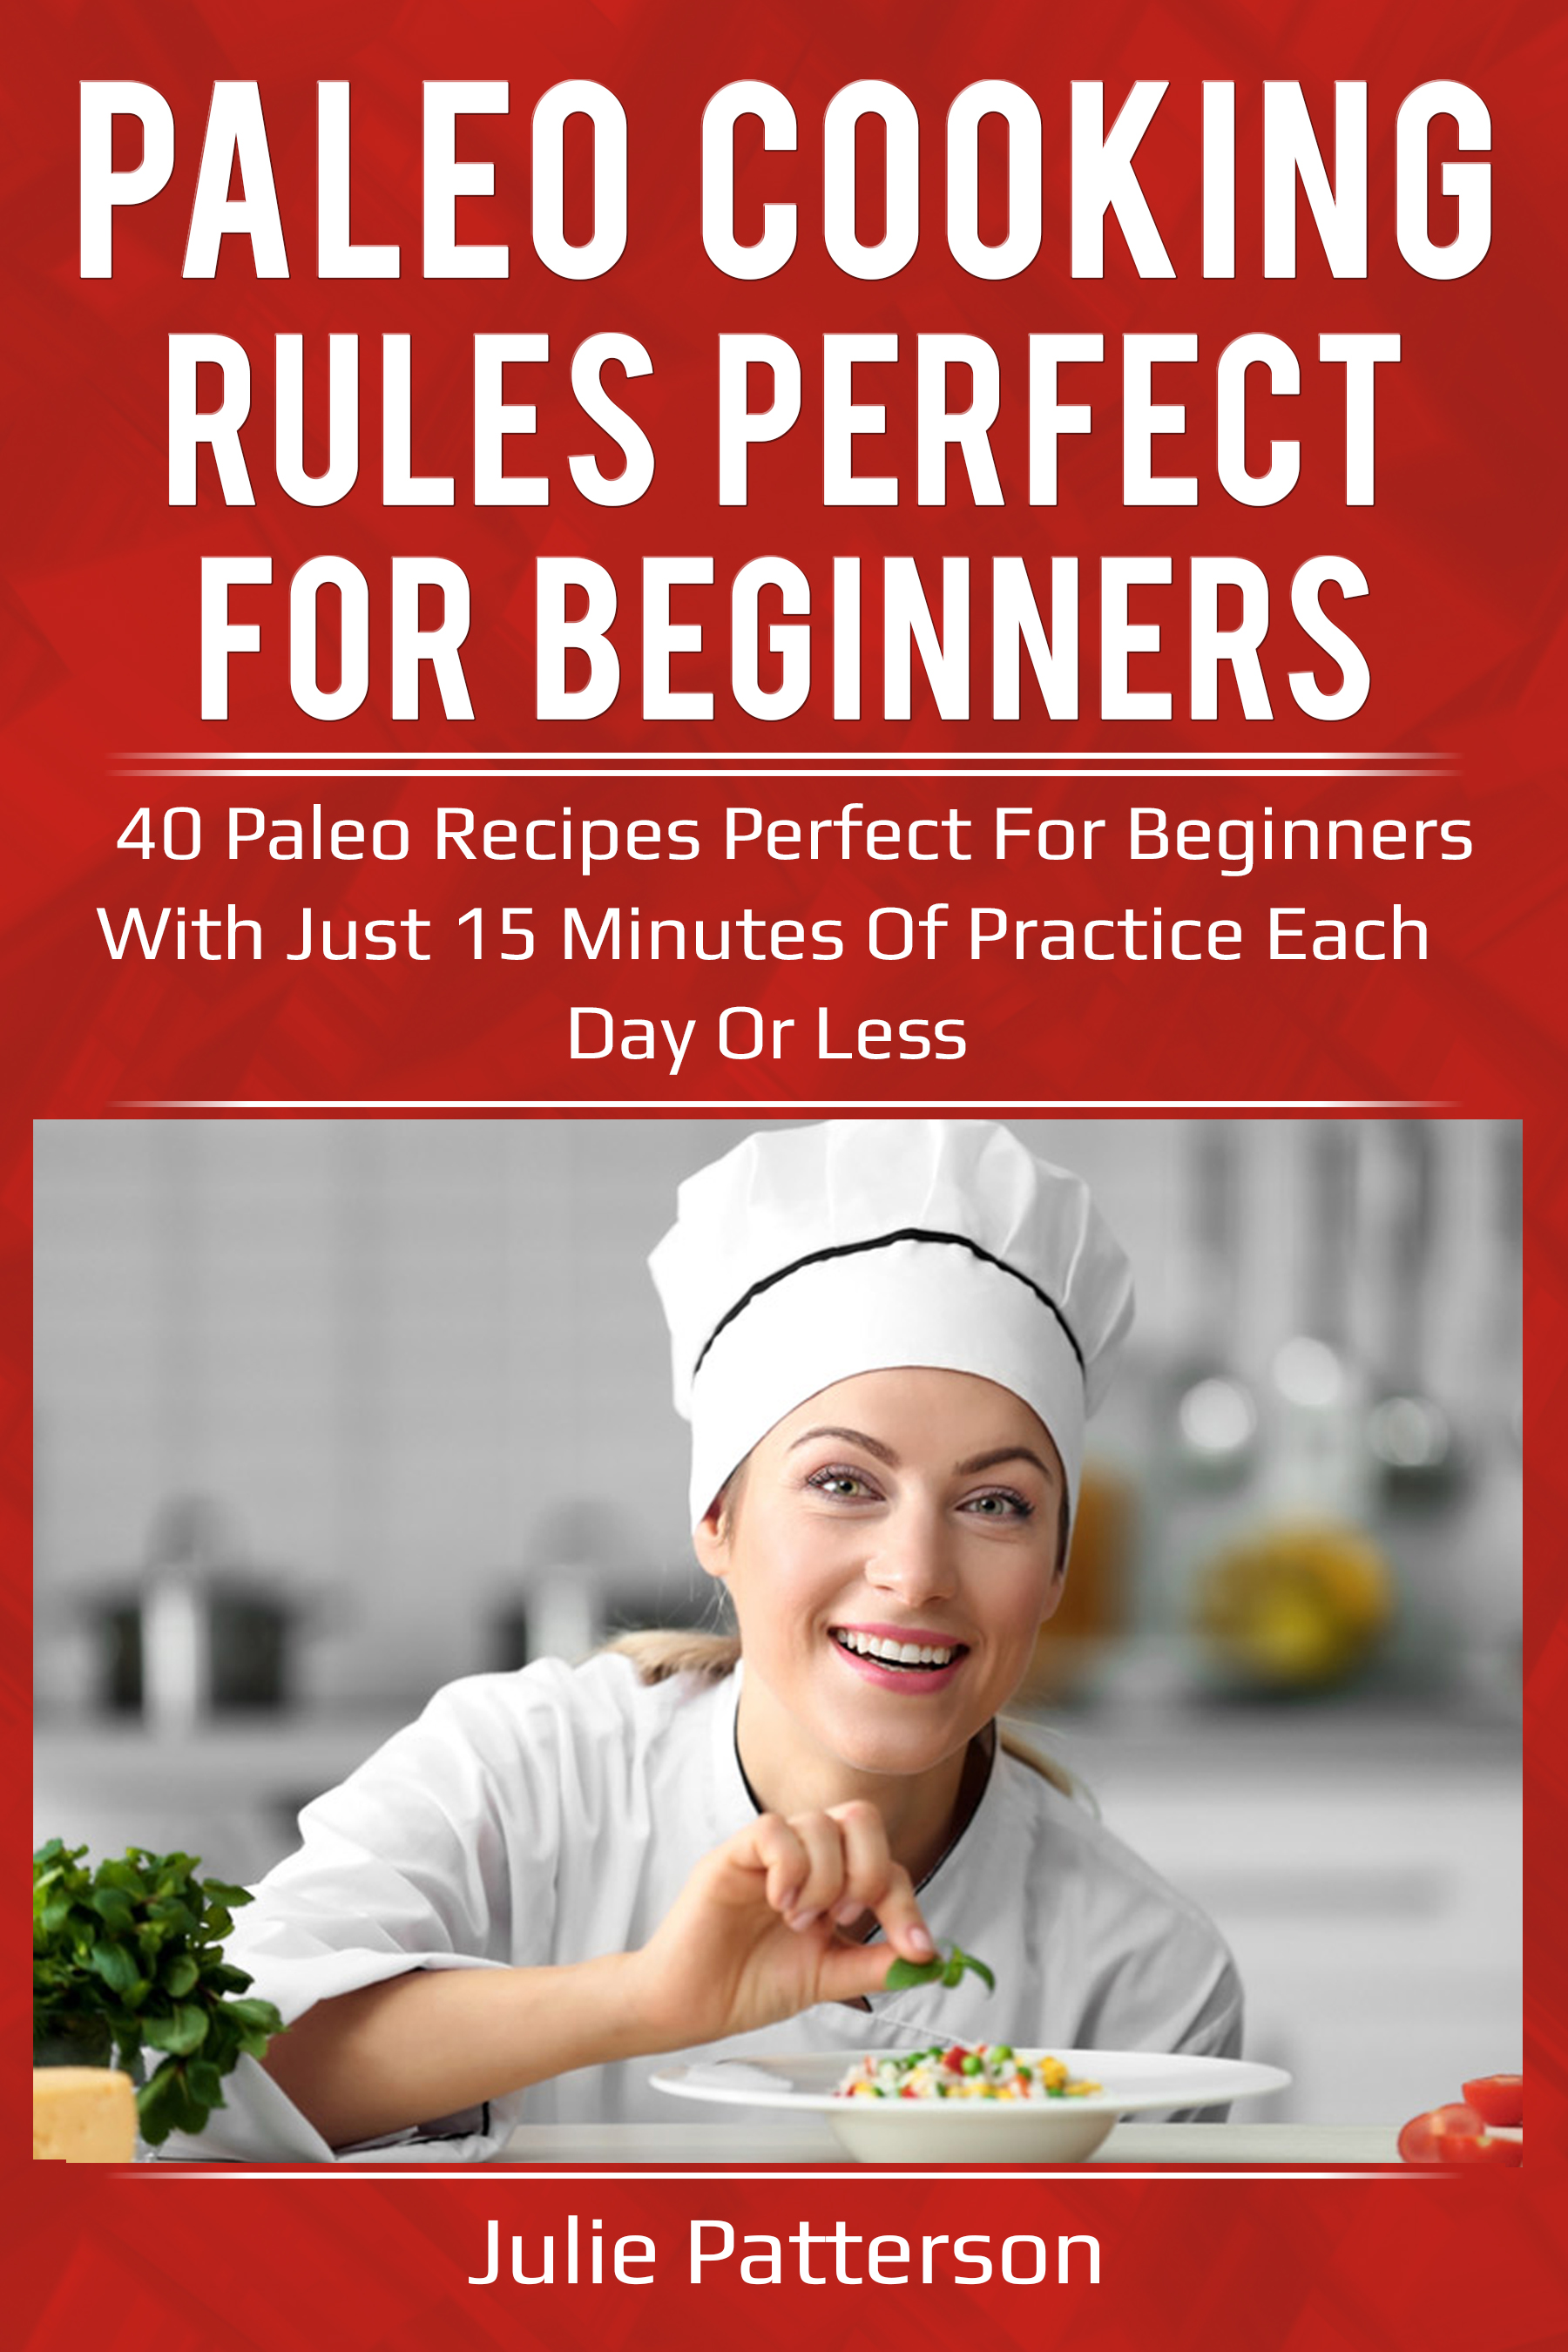 FREE: Paleo cooking rules perfect for beginners: 40 paleo recipes perfect for beginners with just 15 minutes of practice each day or less by juliepatterson